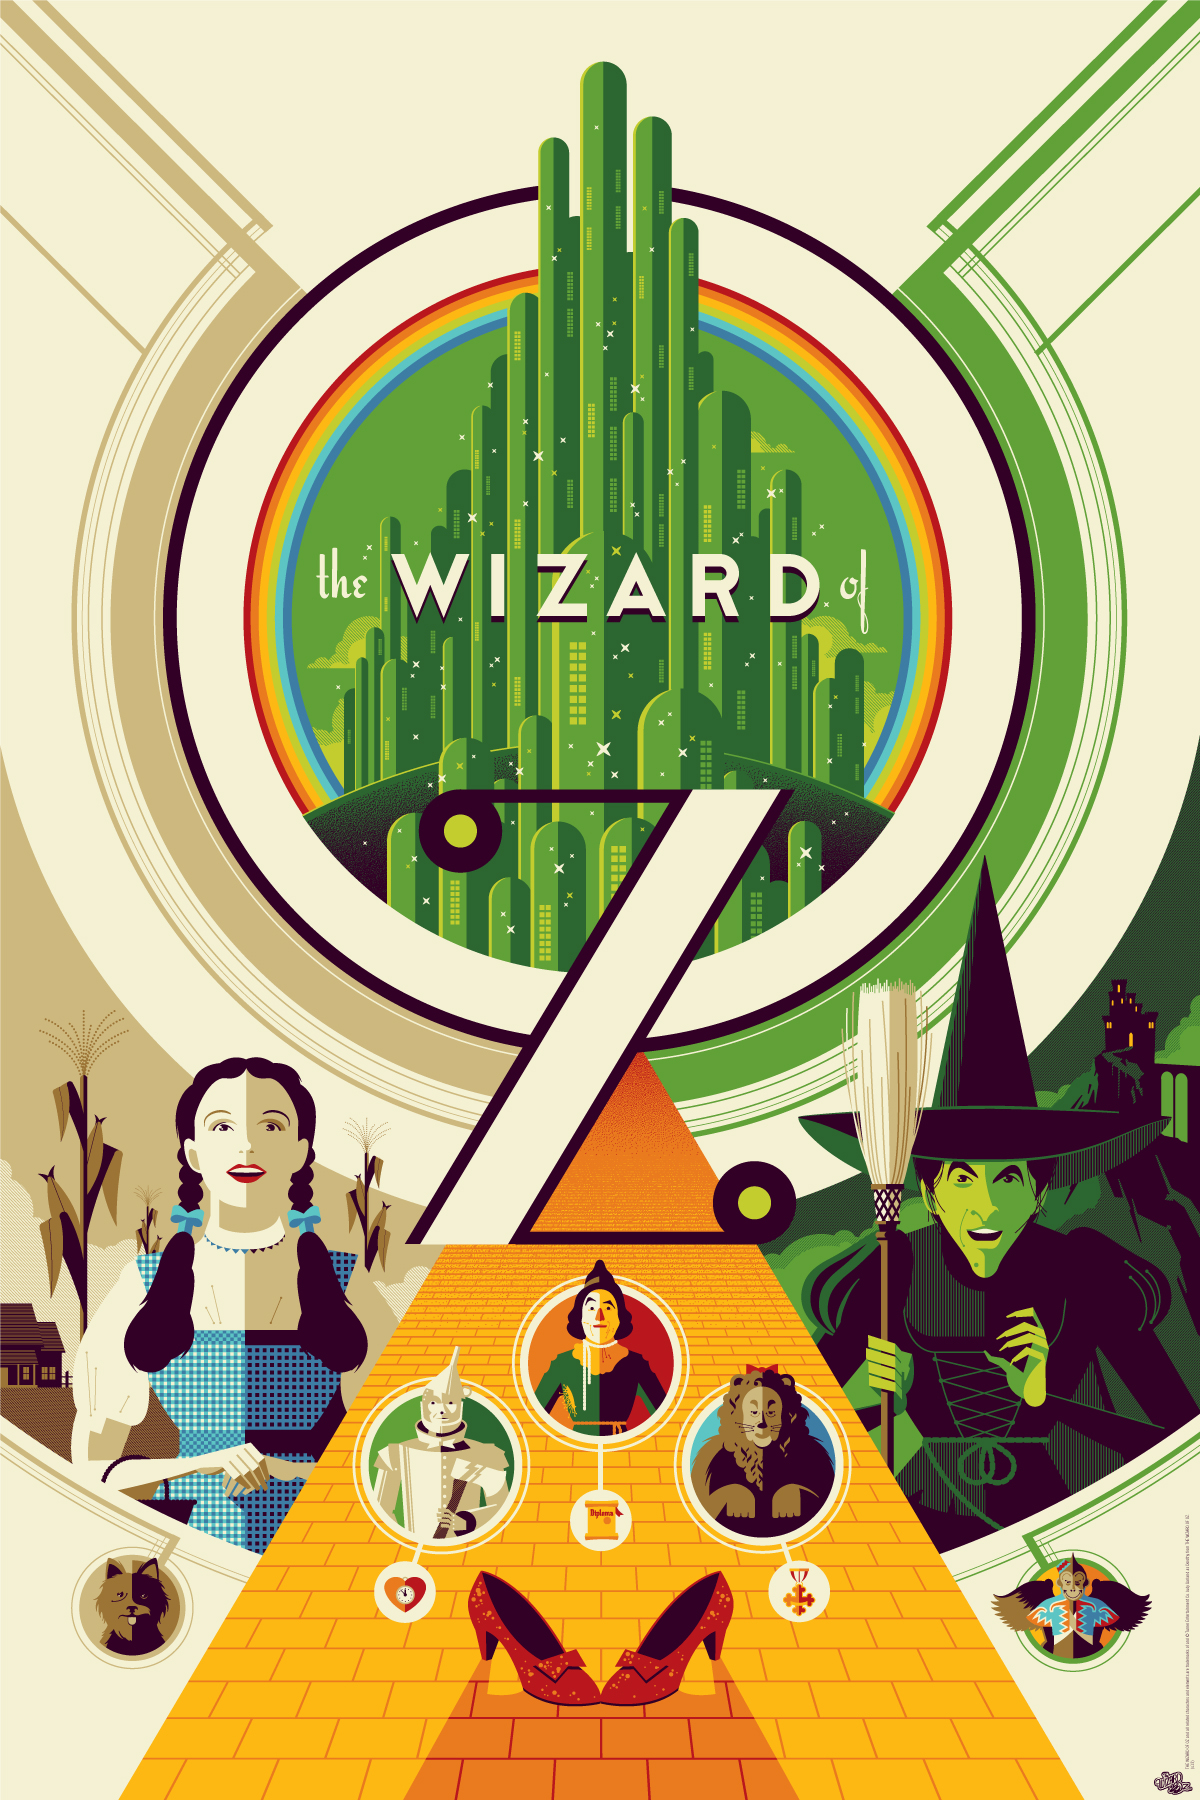 Wizard of Oz poster by Tom Whalen (Image: Tom Whalen)